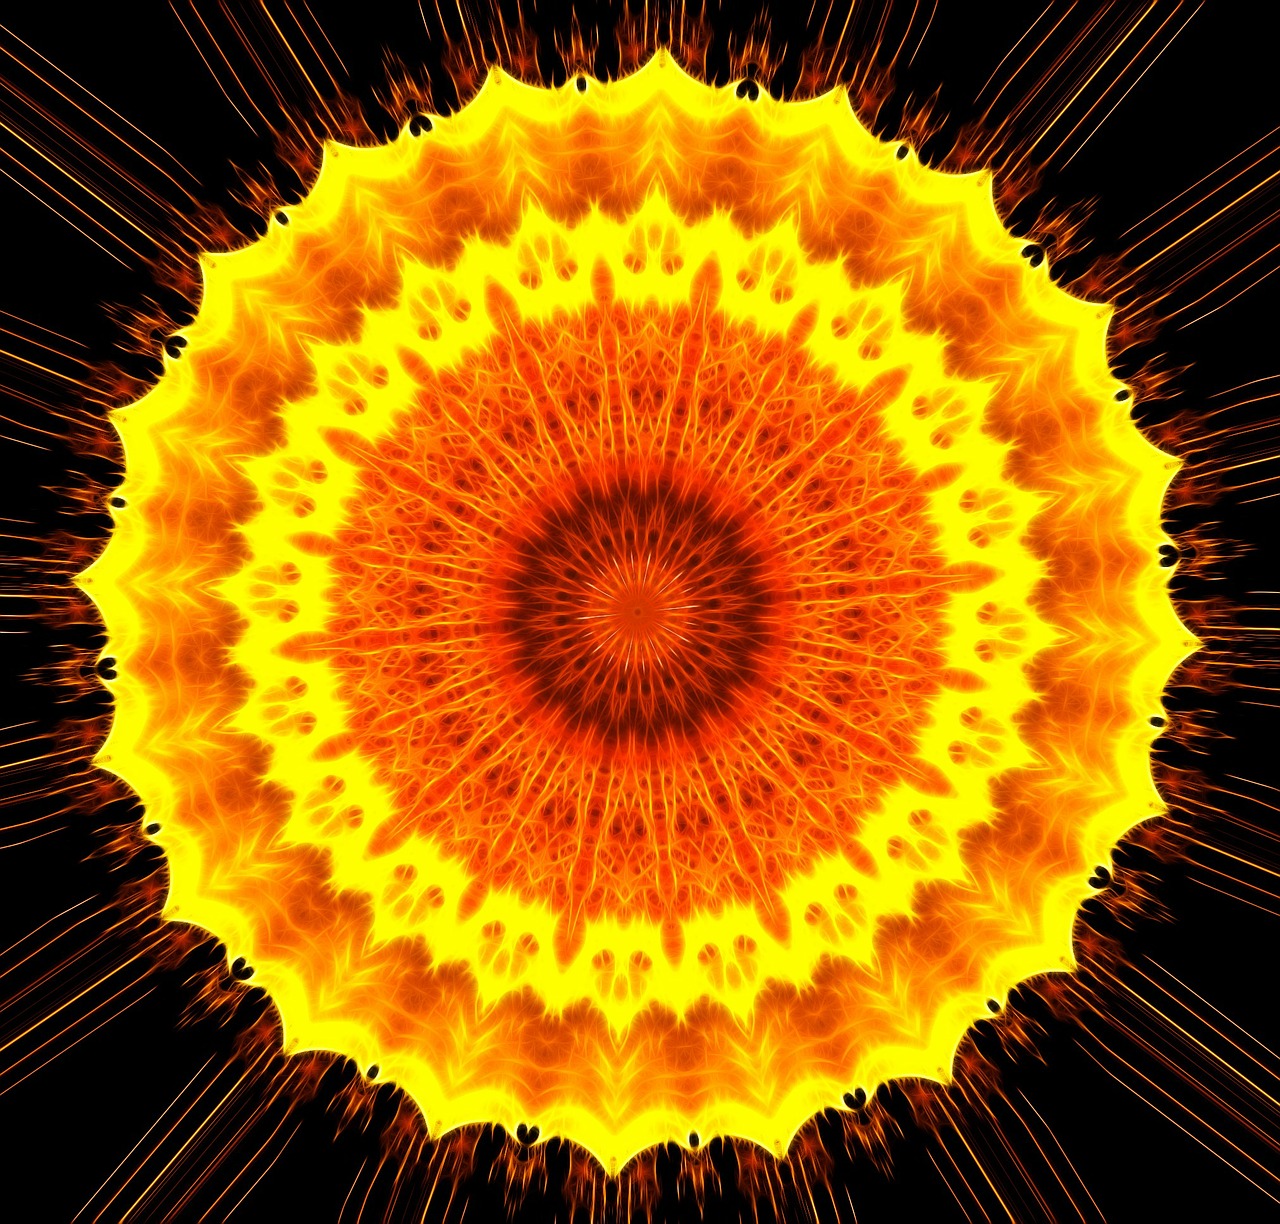 a close up of a fire flower on a black background, a digital rendering, inspired by Benoit B. Mandelbrot, flickr, nuclear art, bright yellow and red sun, mandala art, orange halo, orange backgorund